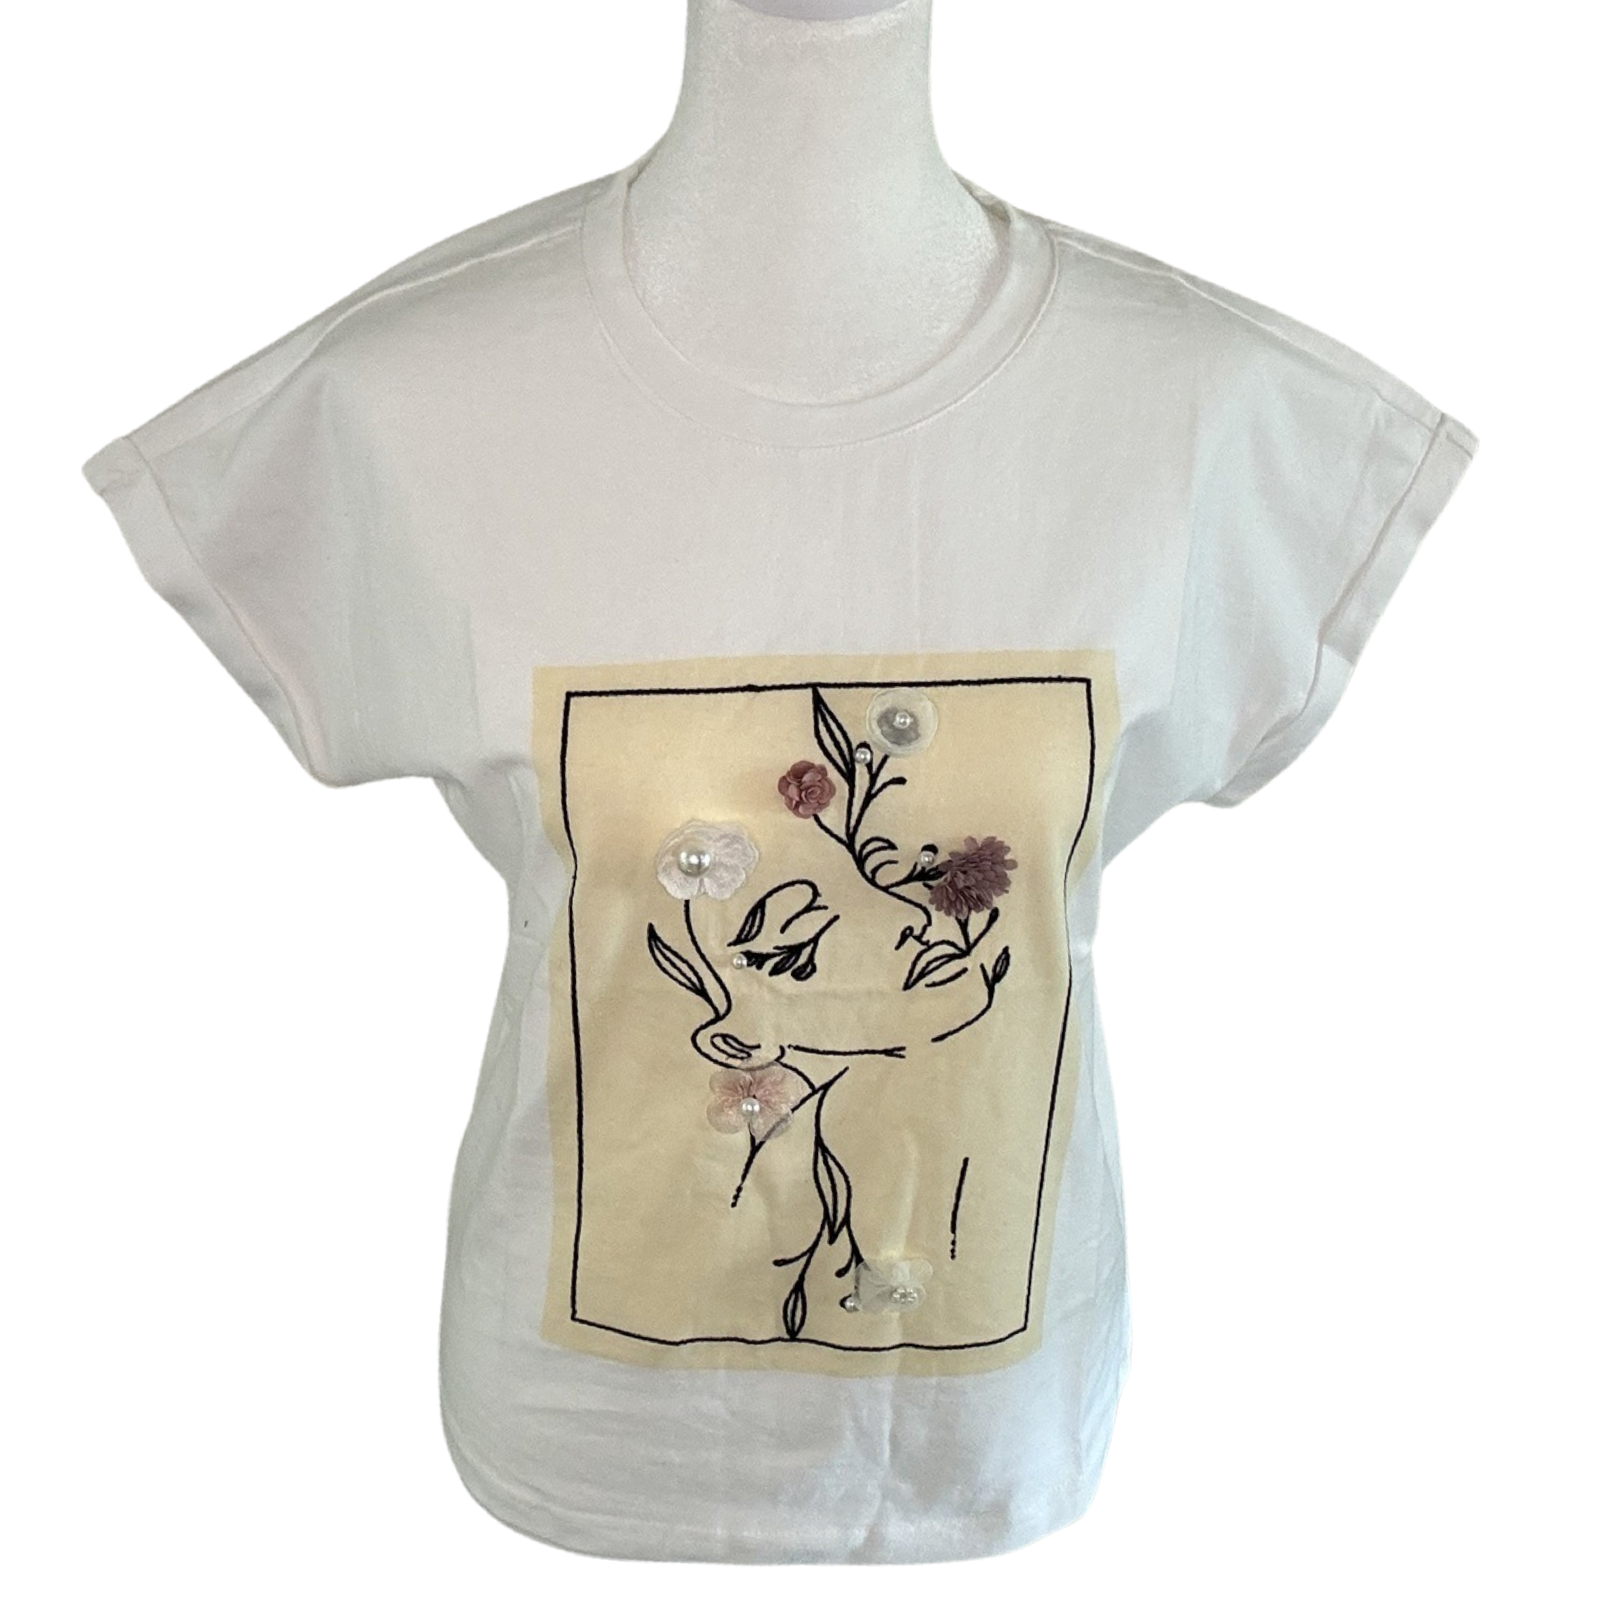 Flower face graphic tee